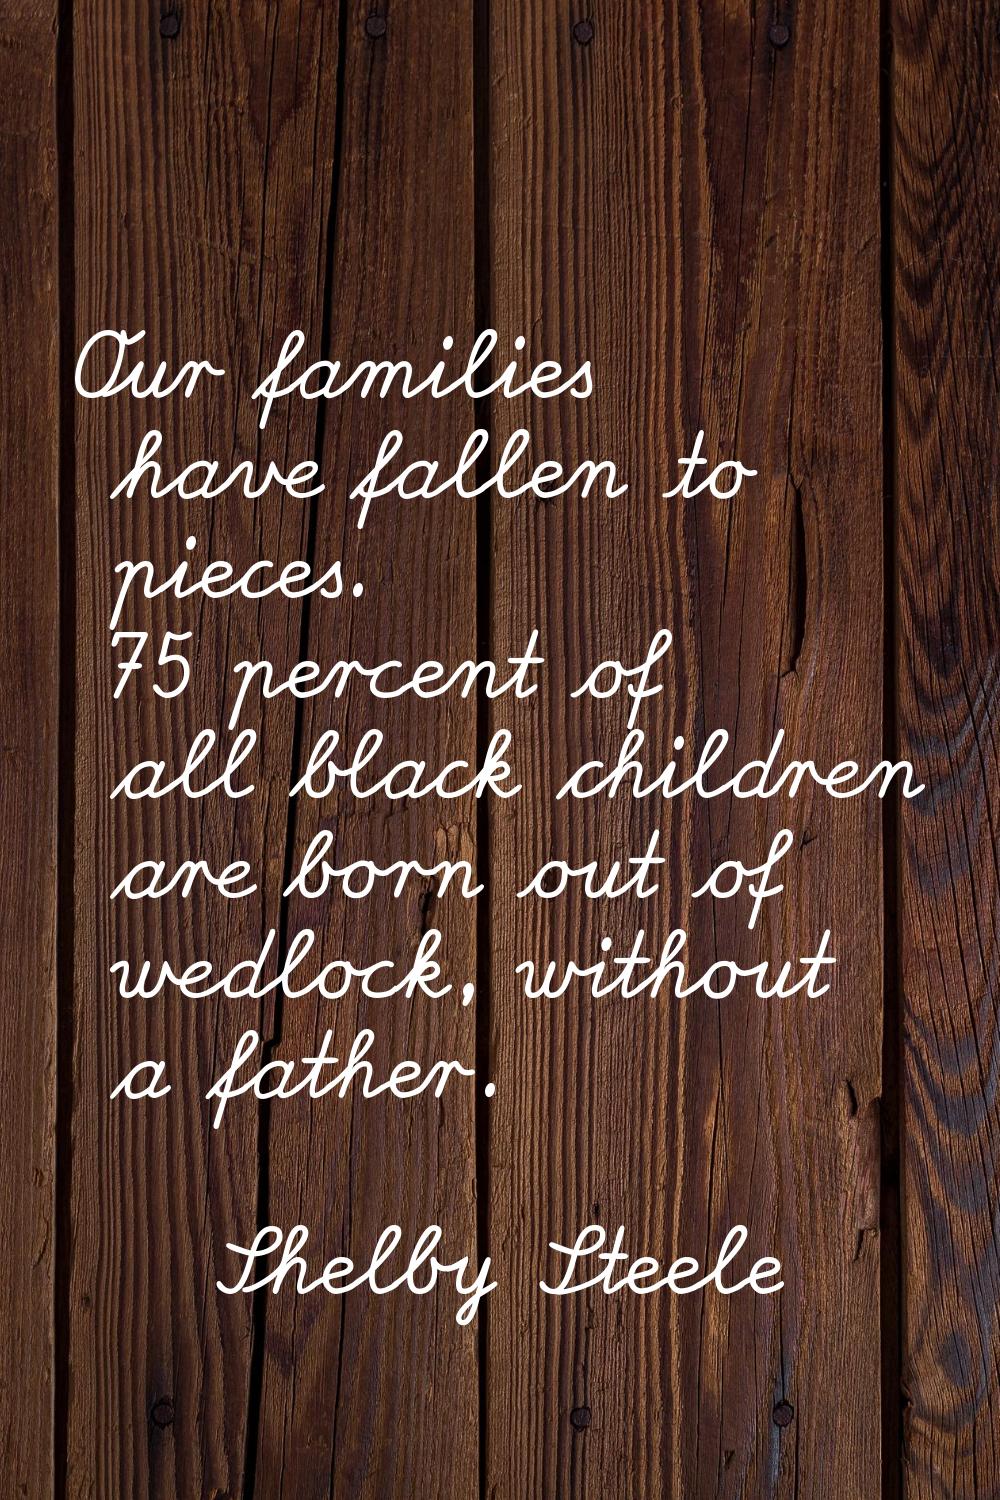 Our families have fallen to pieces. 75 percent of all black children are born out of wedlock, witho